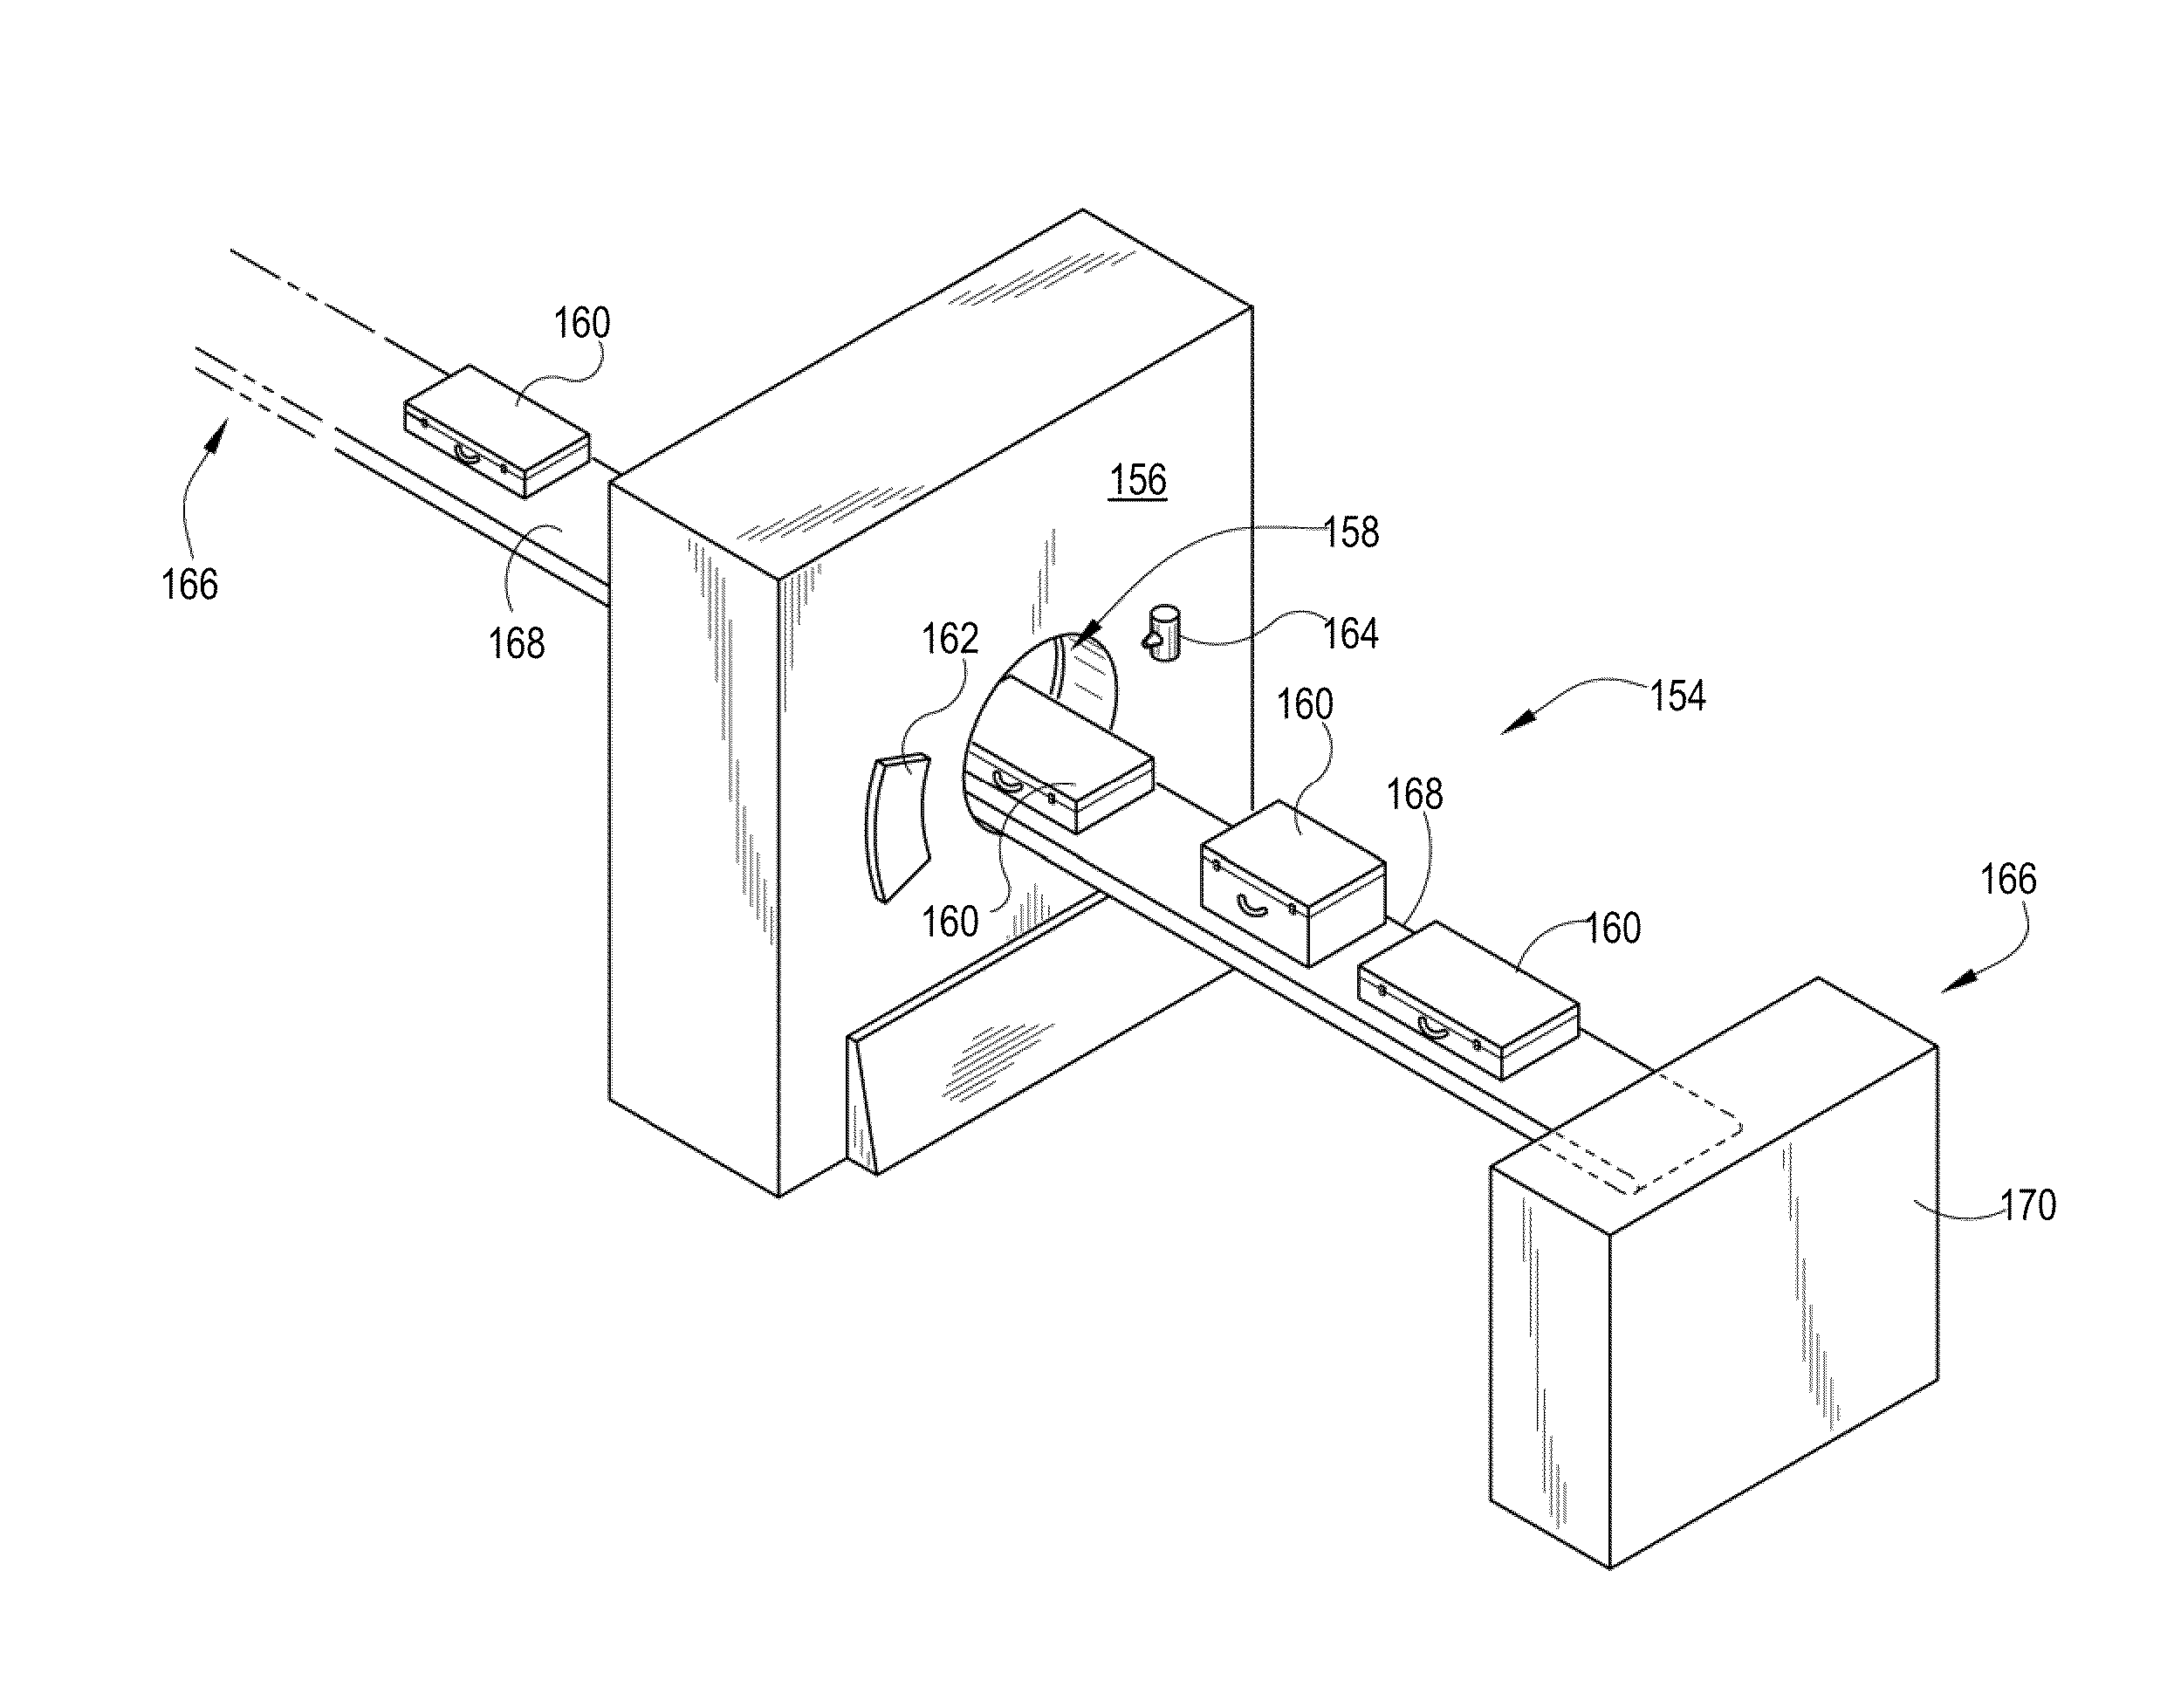 Apparatus for reducing photodiode thermal gain coefficient and method of making same